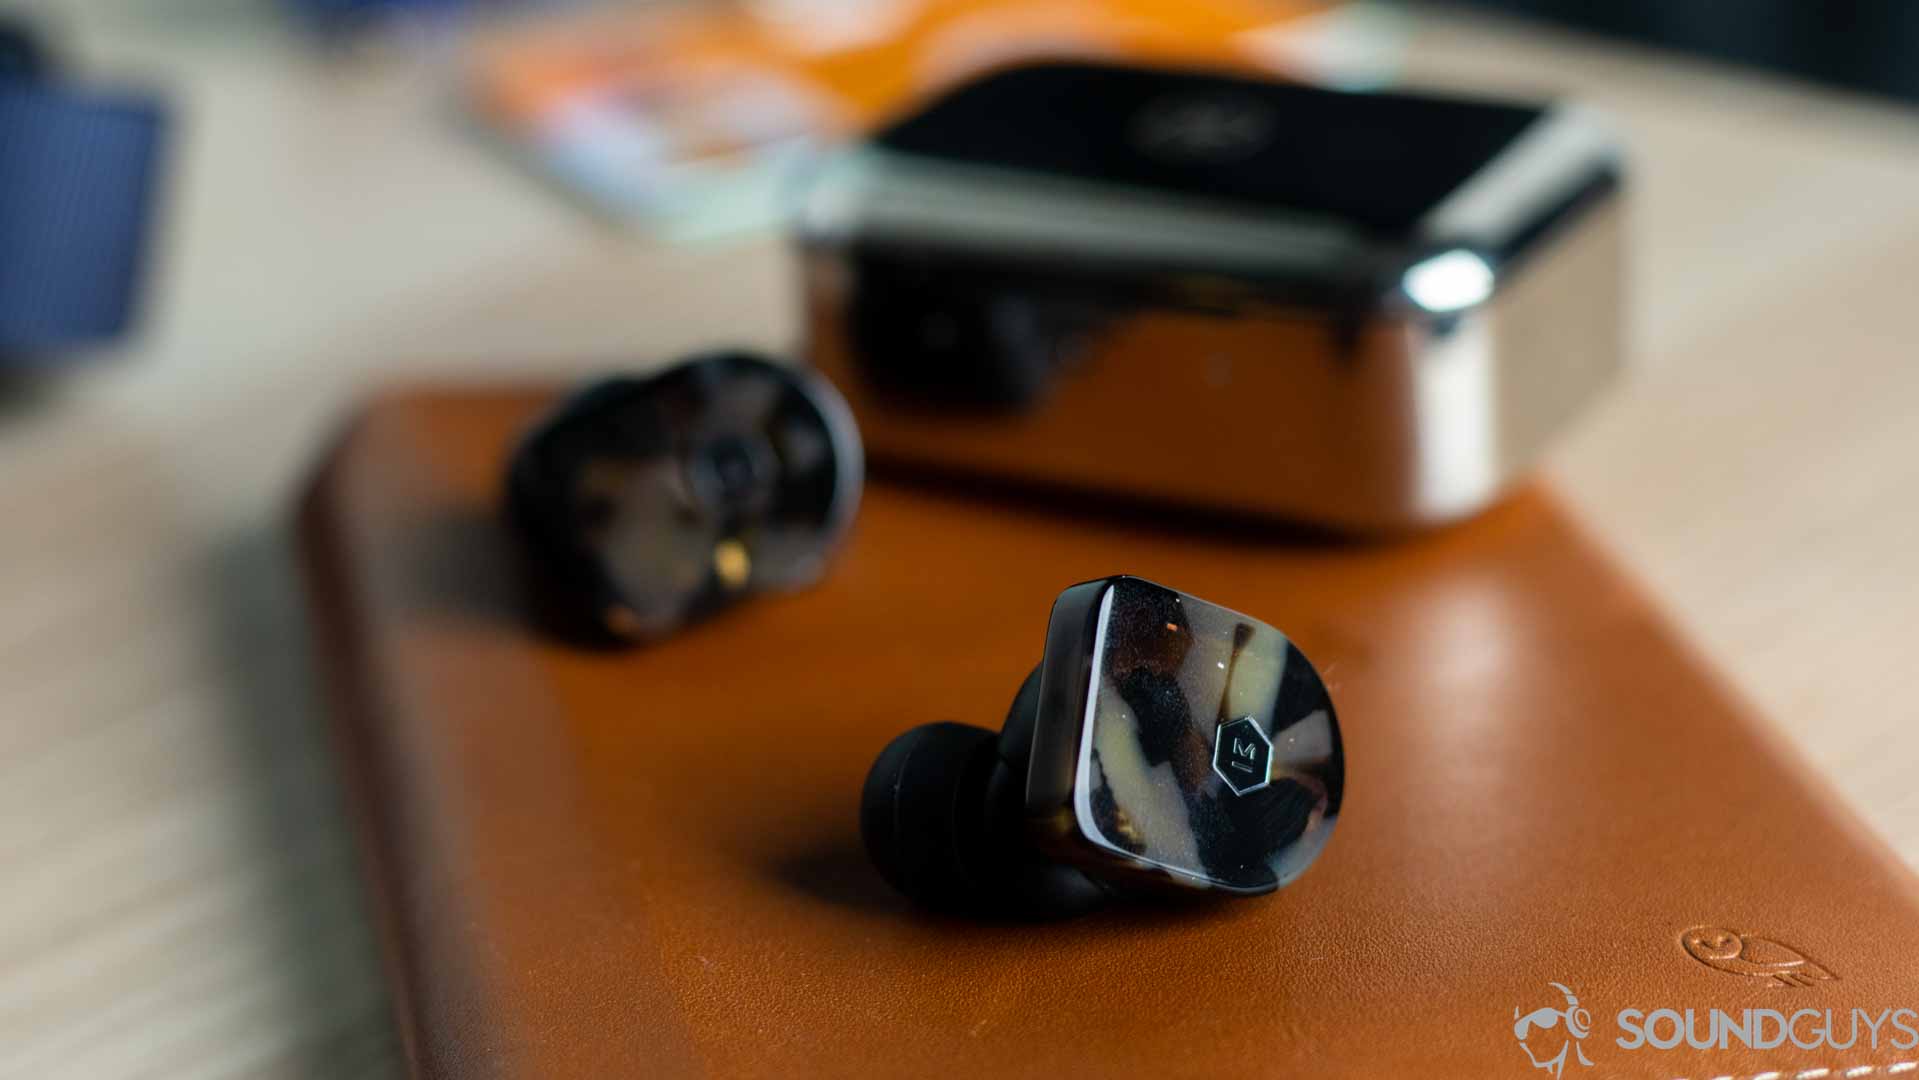 Close-up shot of the Master &amp; Dynamic logo on the MW07 earbuds.